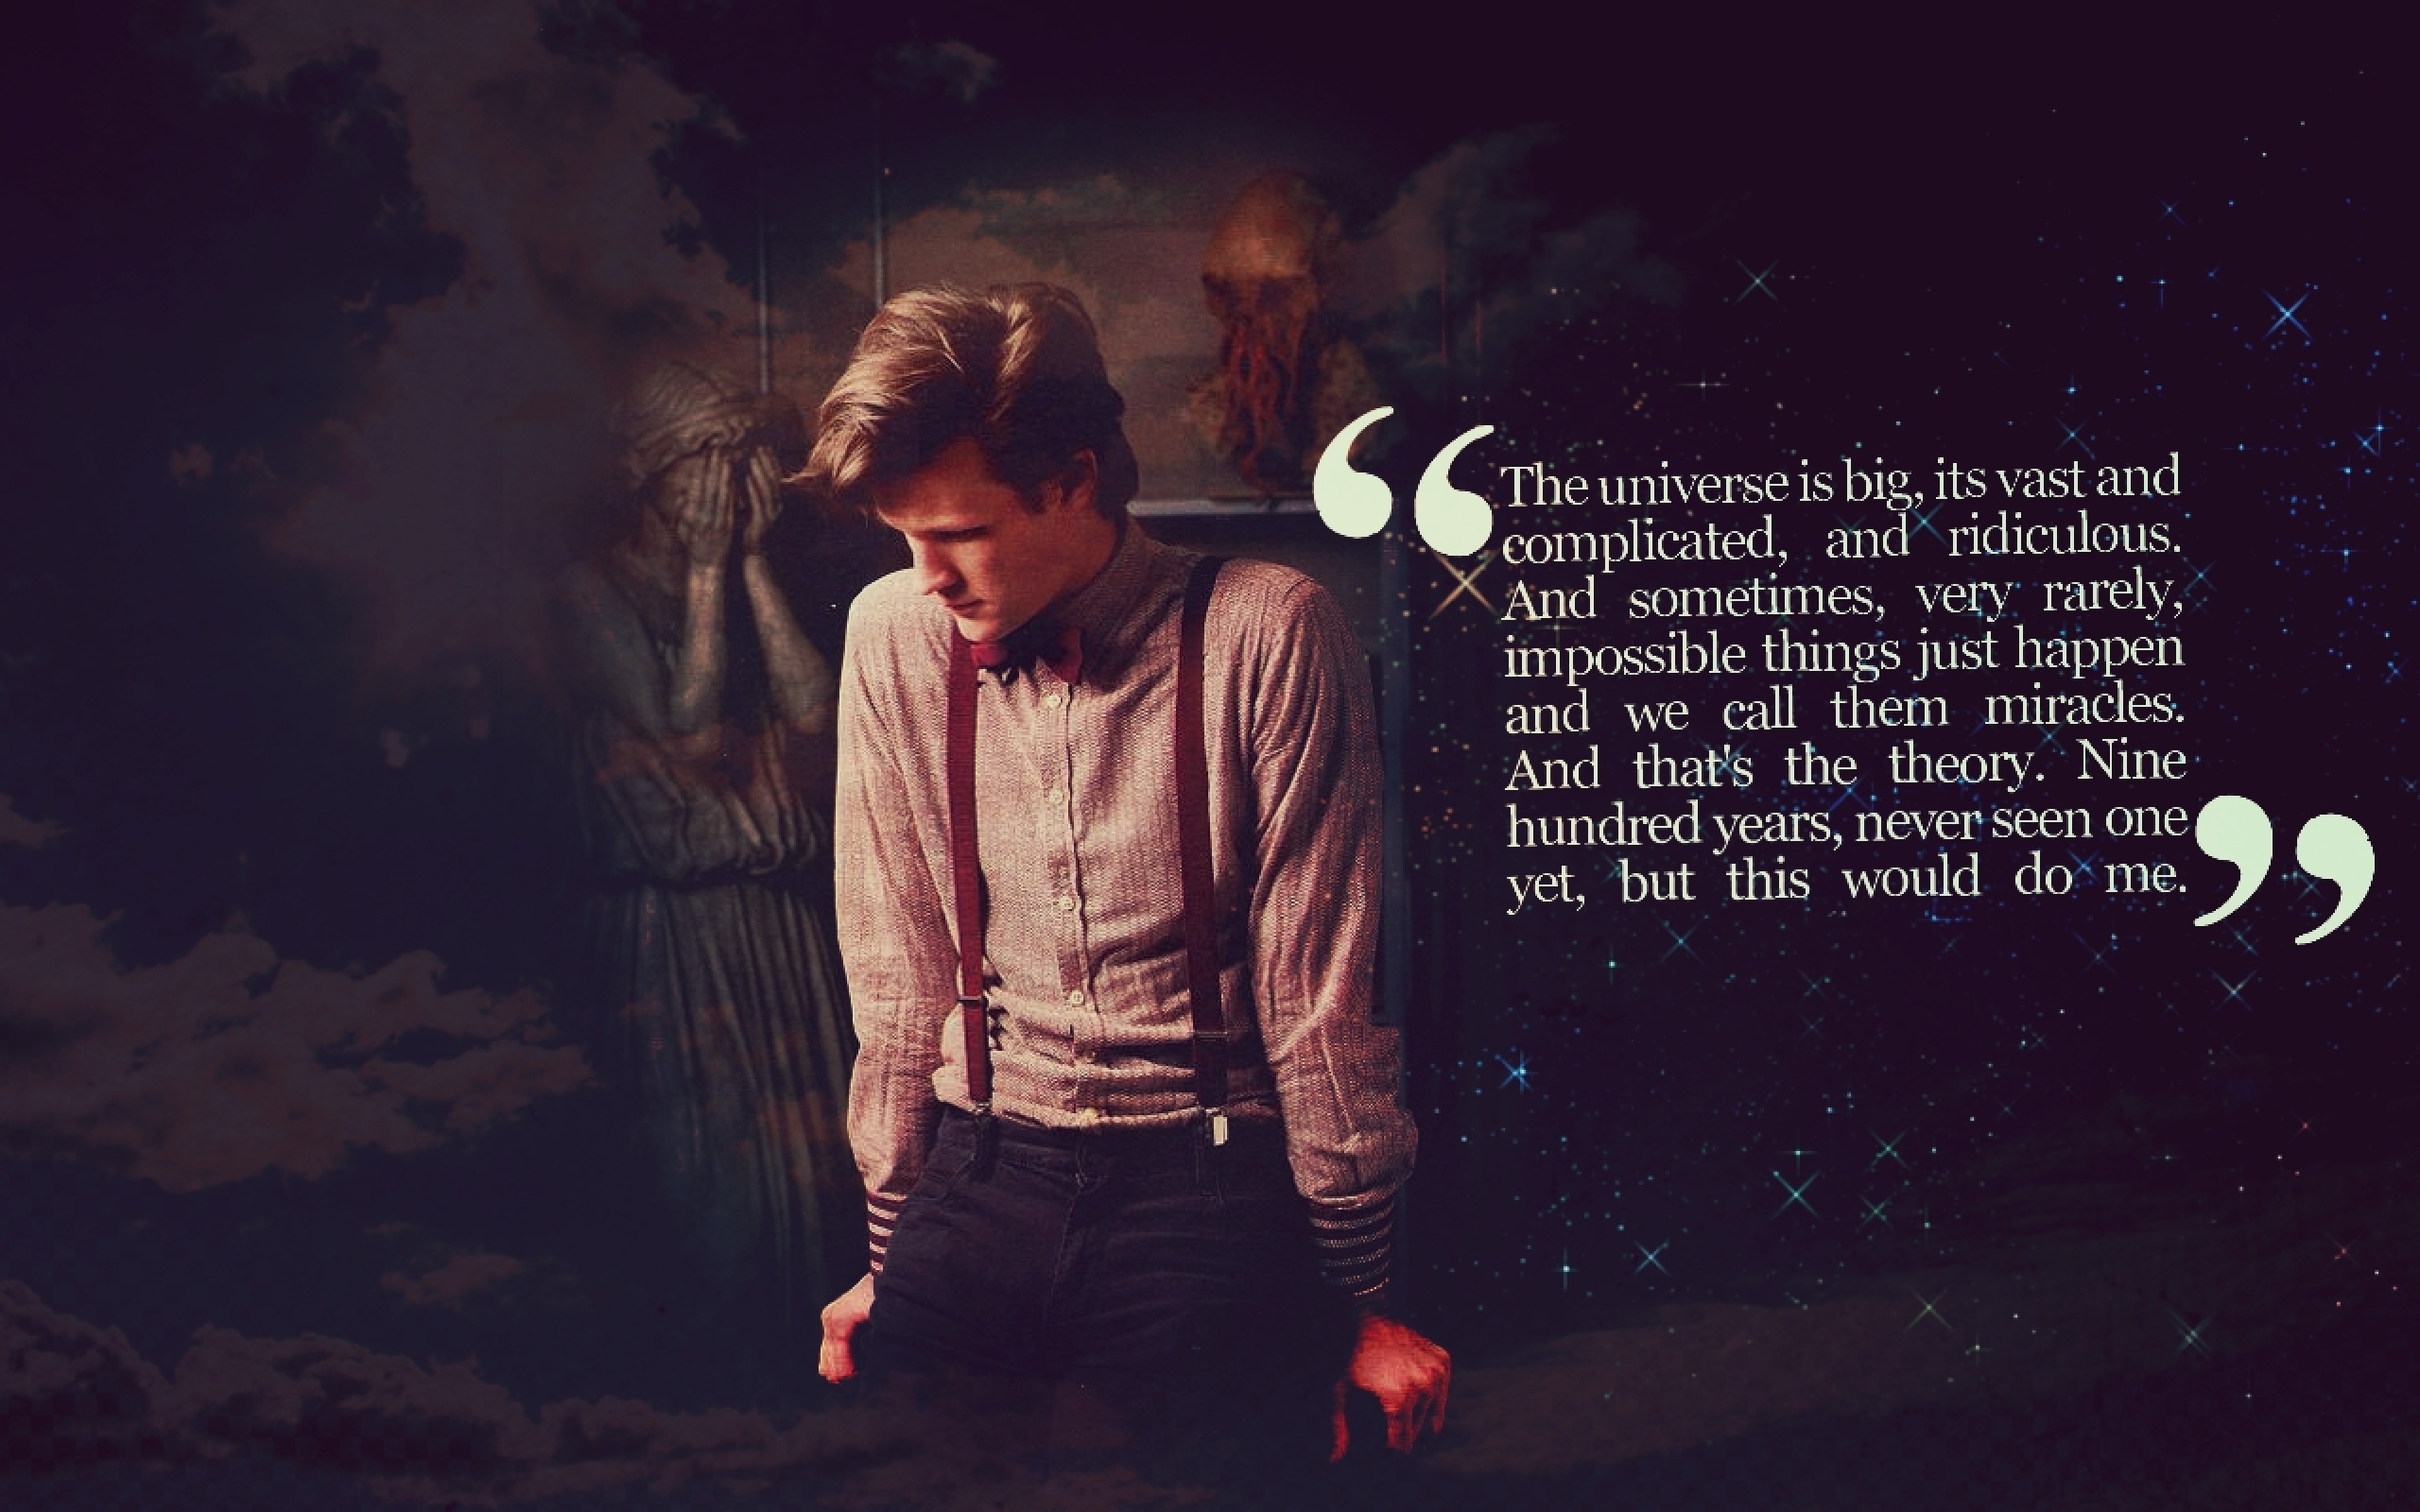 Quotes Matt Smith Eleventh Doctor Doctor Who Weeping - Doctor Who Matt Smith - HD Wallpaper 